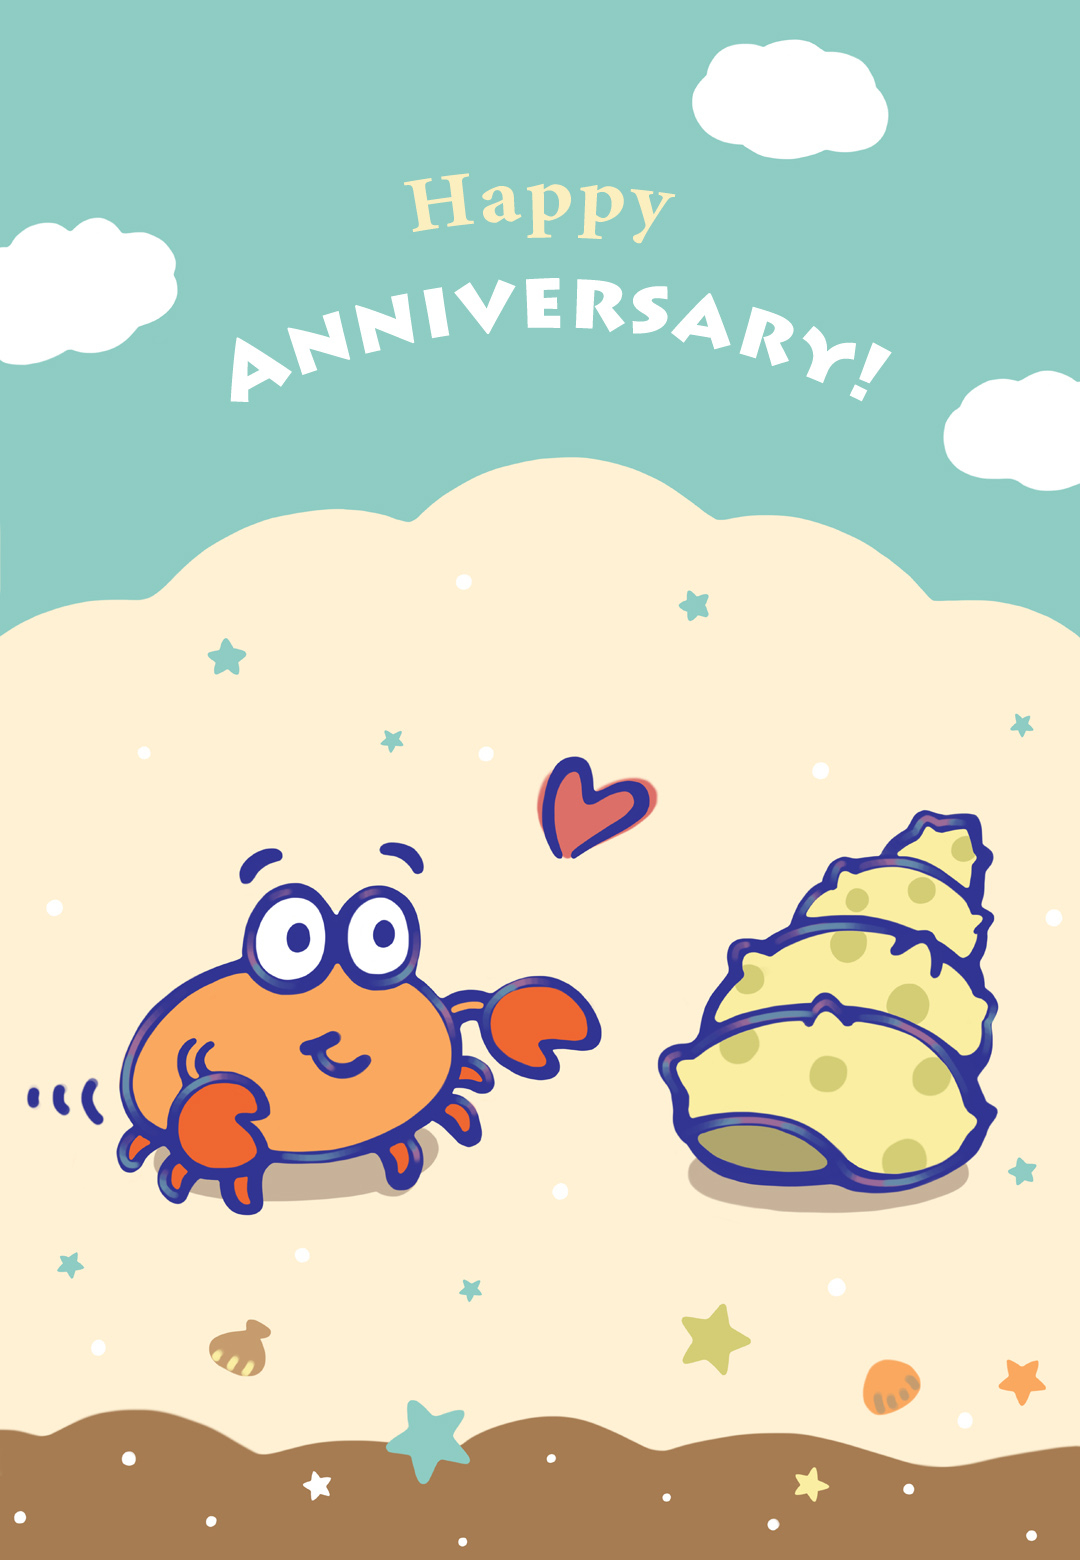 When I Found You - Free Happy Anniversary Card | Greetings Island - Free Printable Anniversary Cards